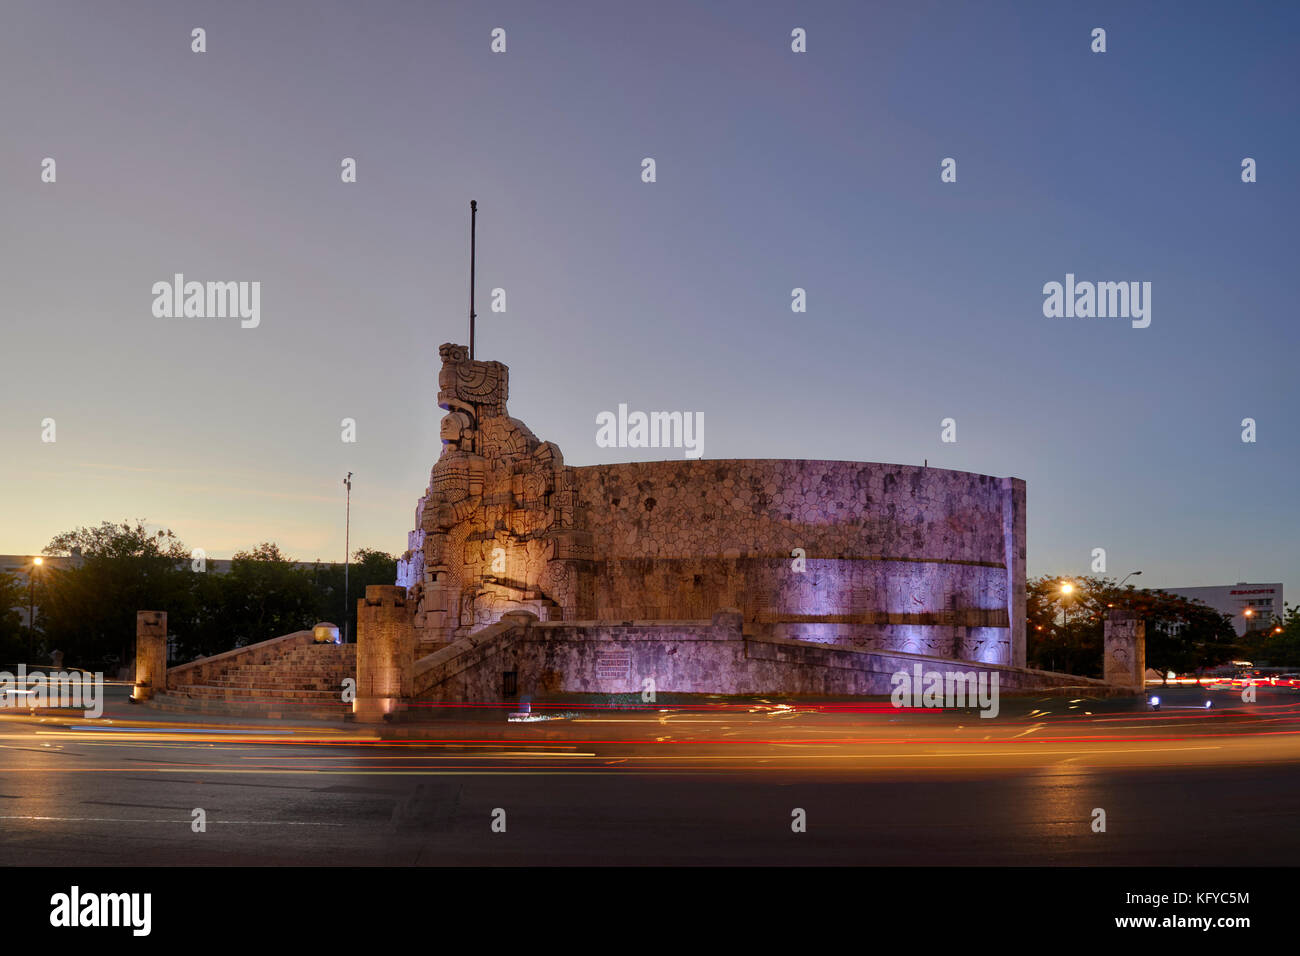 Night shot of the Monument to Motherland, Monumento a La Patria in spanish, with car light trails, in Merida, Yucatan, Mexico Stock Photo